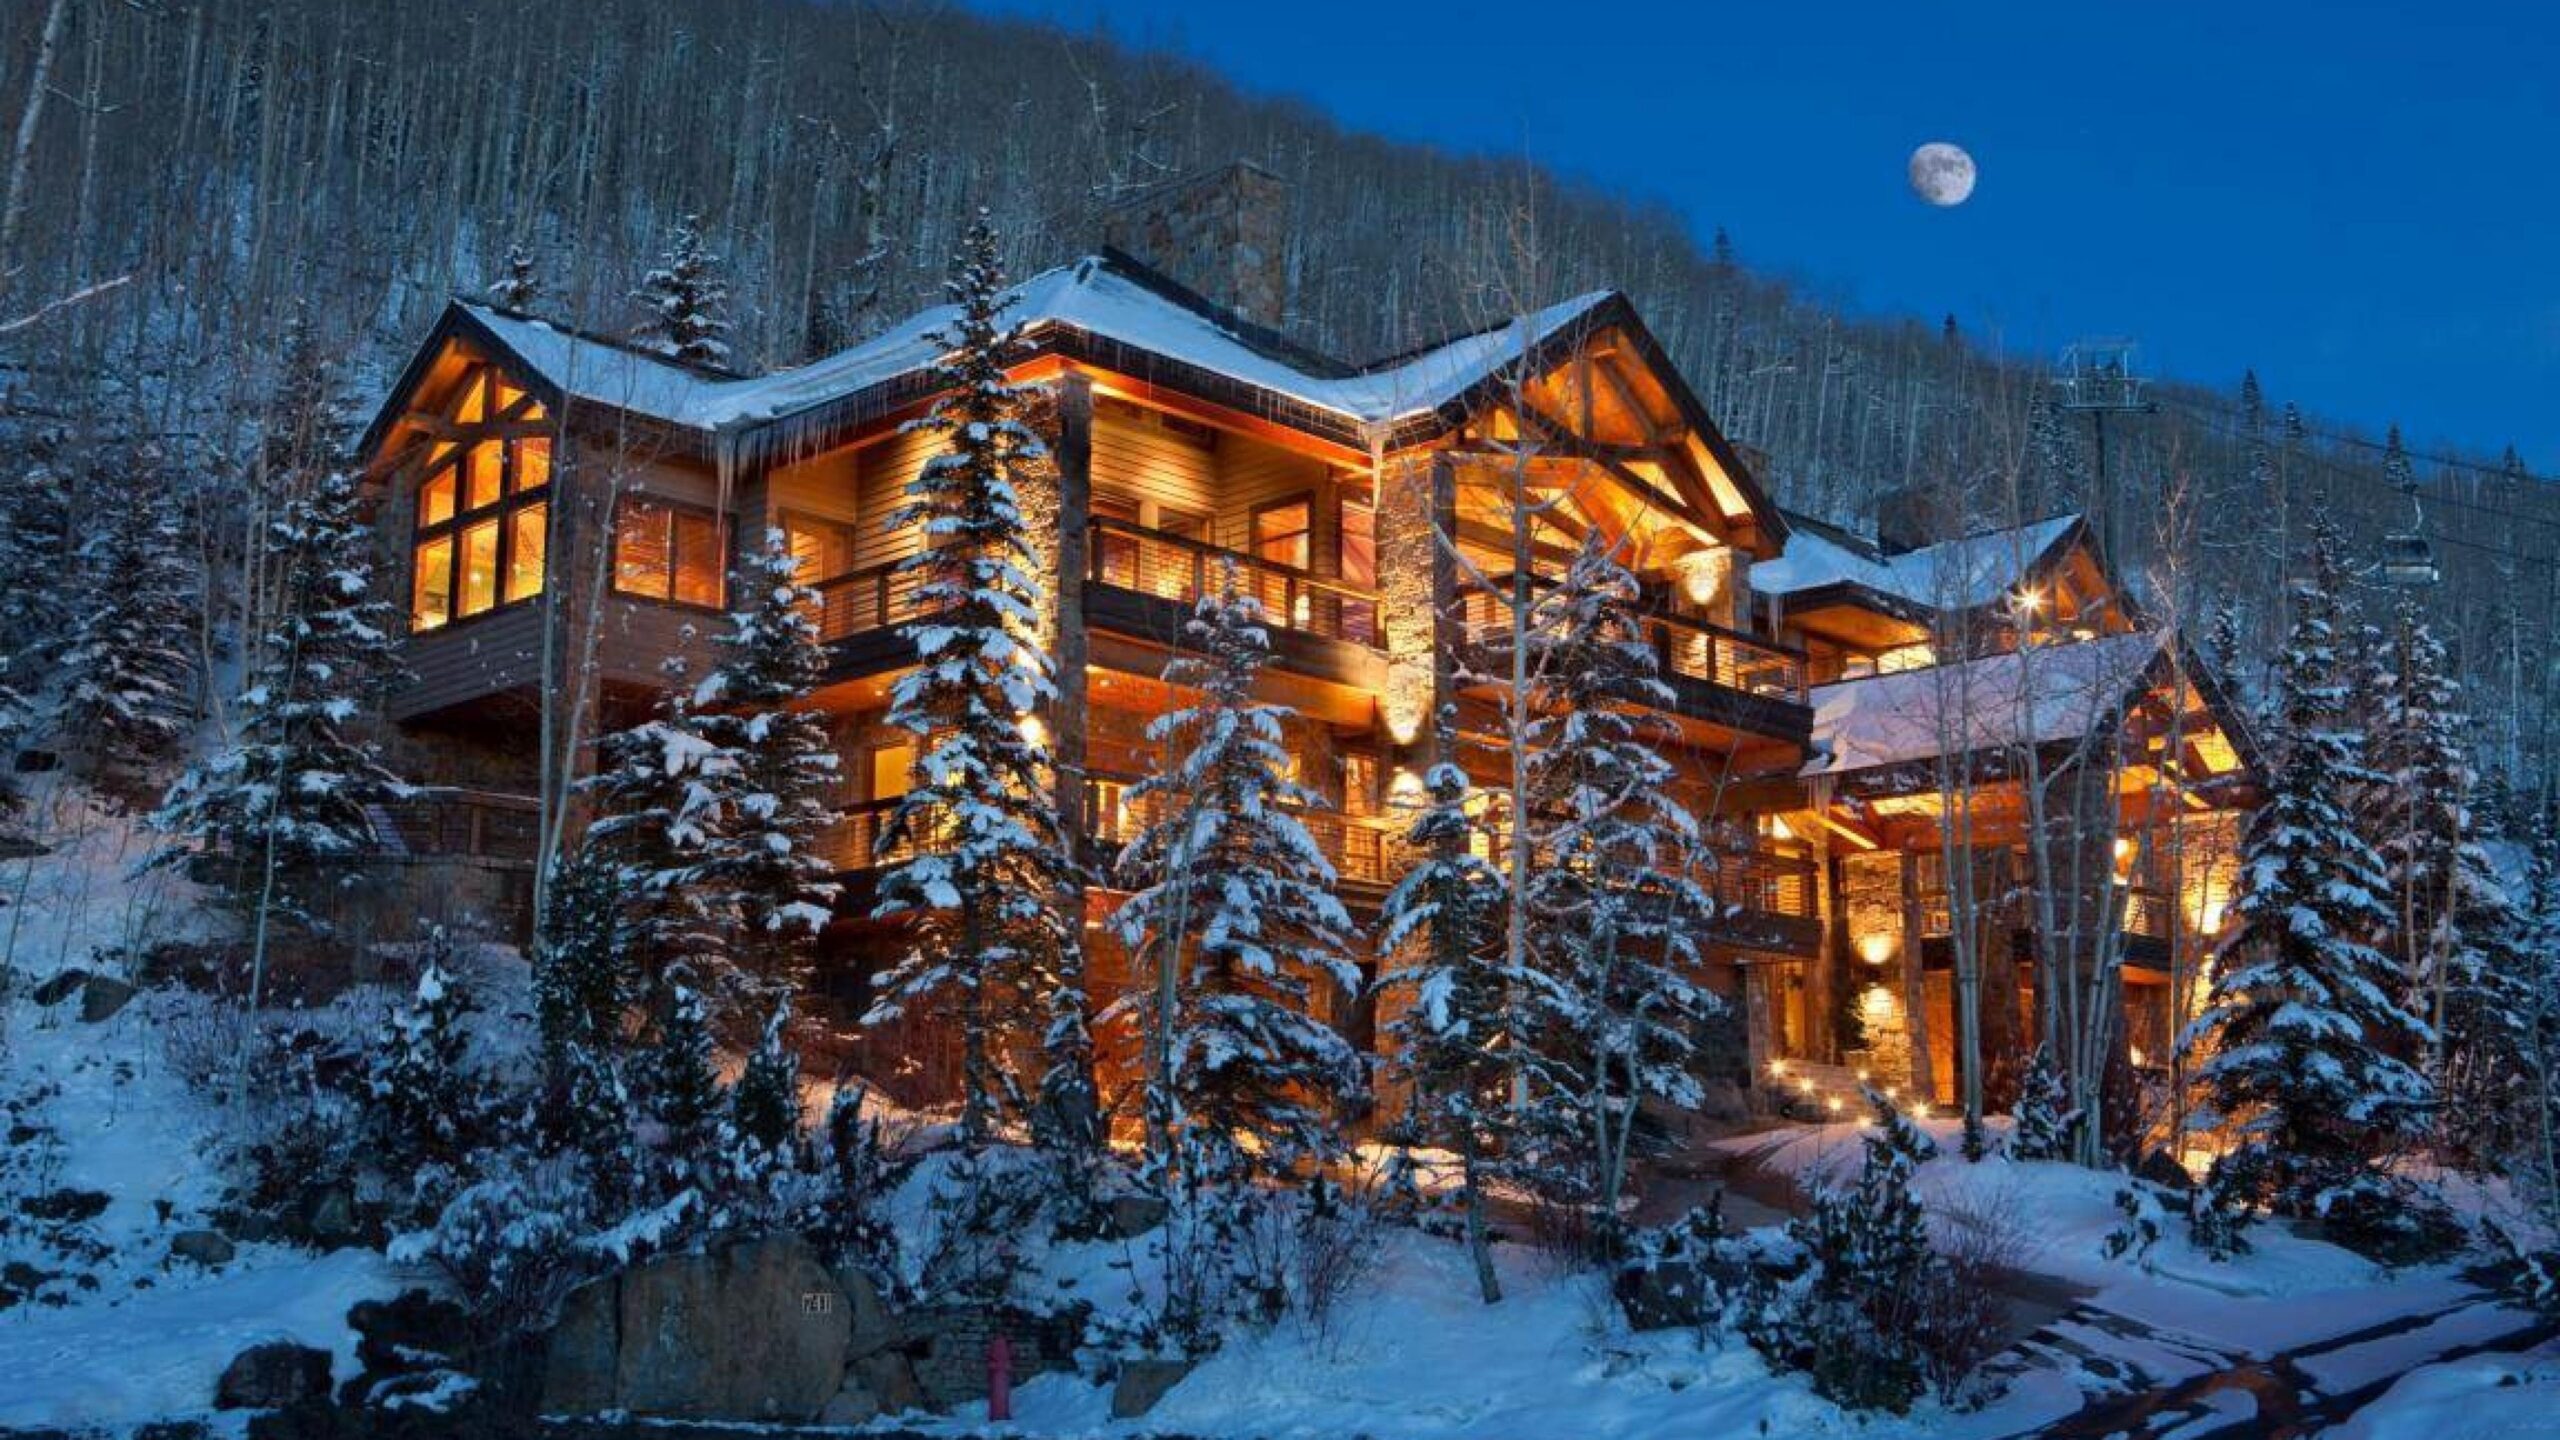 Interesting ski chalets perfect for winter escapes | square mile within wonderful mountain home